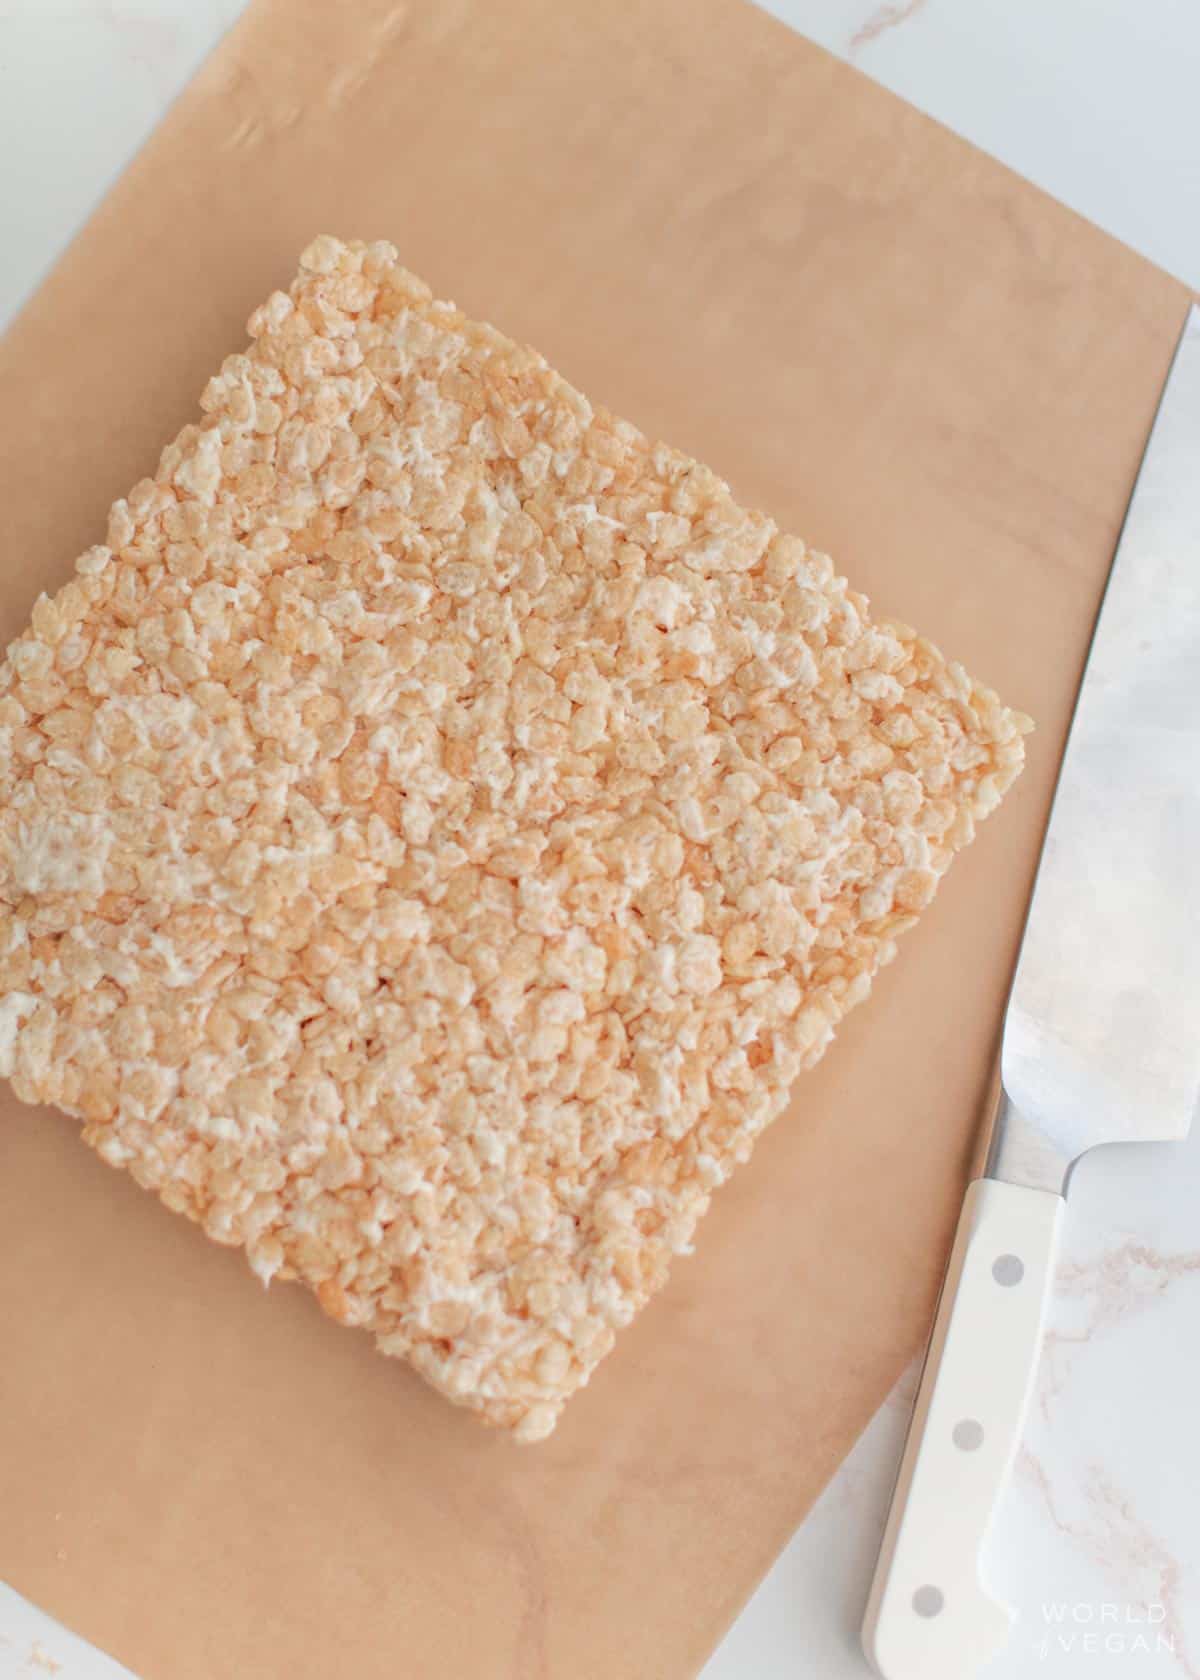 cut rice krispies into squares or rectangles with sharp chefs knife